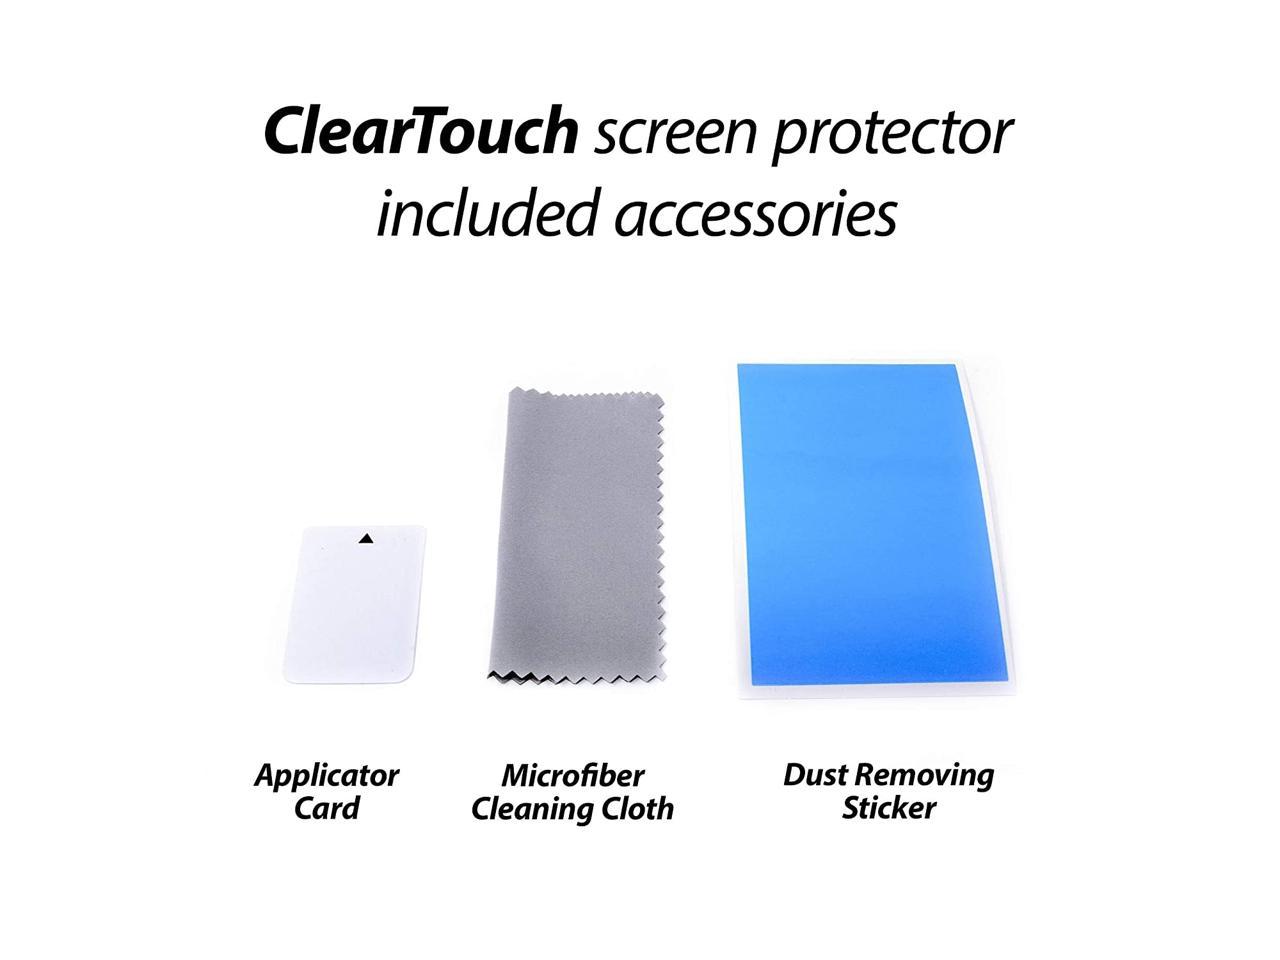 ClearTouch Crystal 2-Pack BoxWave® Shields From Scratches for Wahoo ELEMNT ROAM Wahoo ELEMNT ROAM Screen Protector HD Film Skin